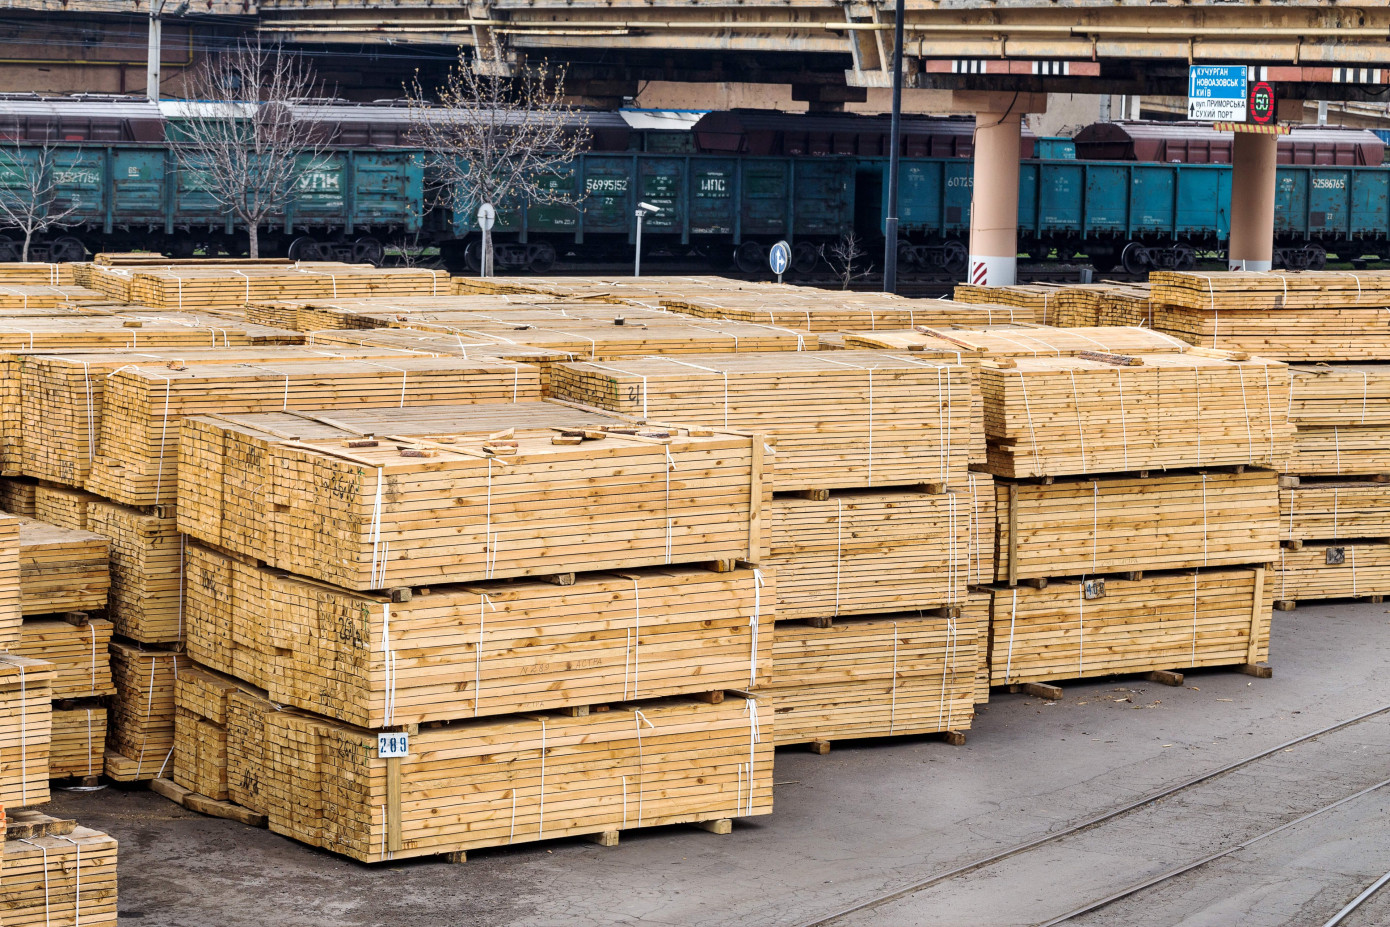 China decreases softwood lumber imports by 34% in July